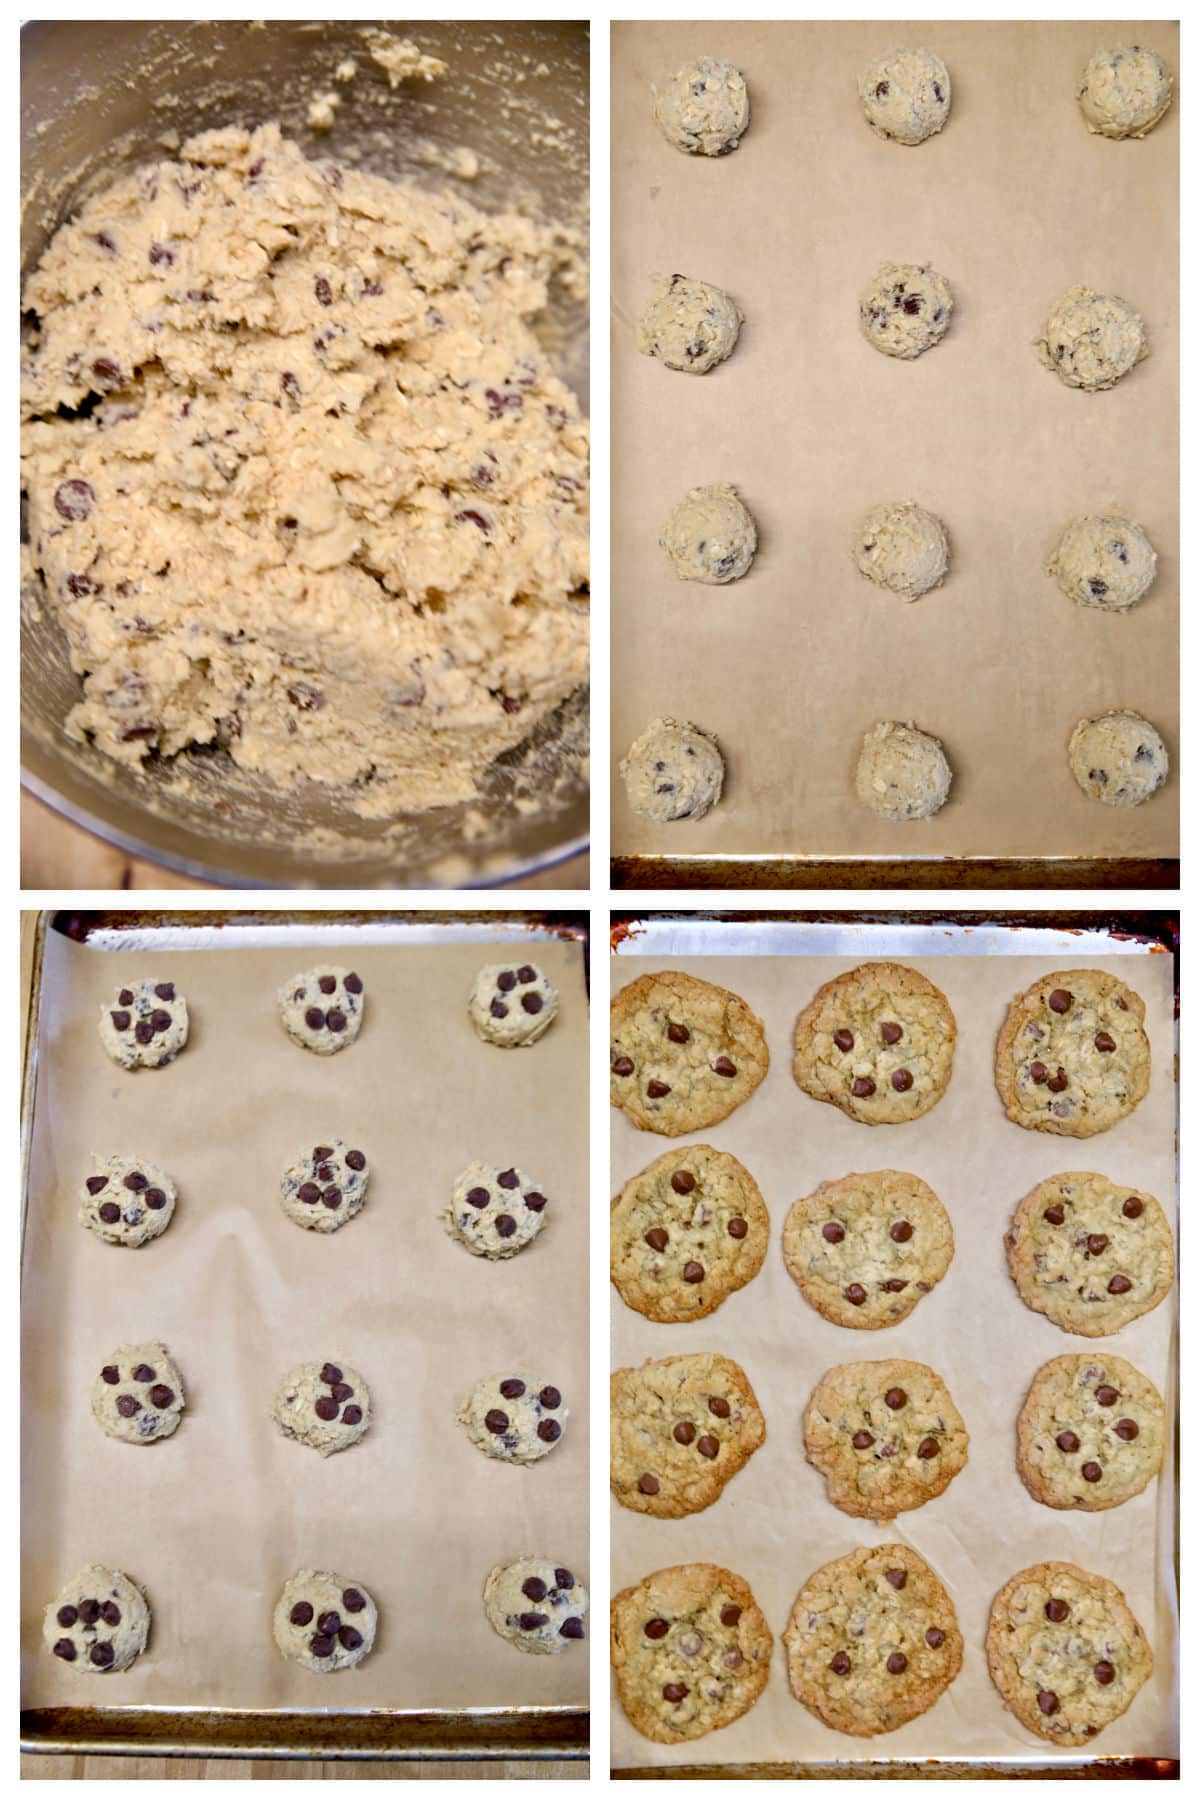 Baking chocolate chip coconut cookies collage.